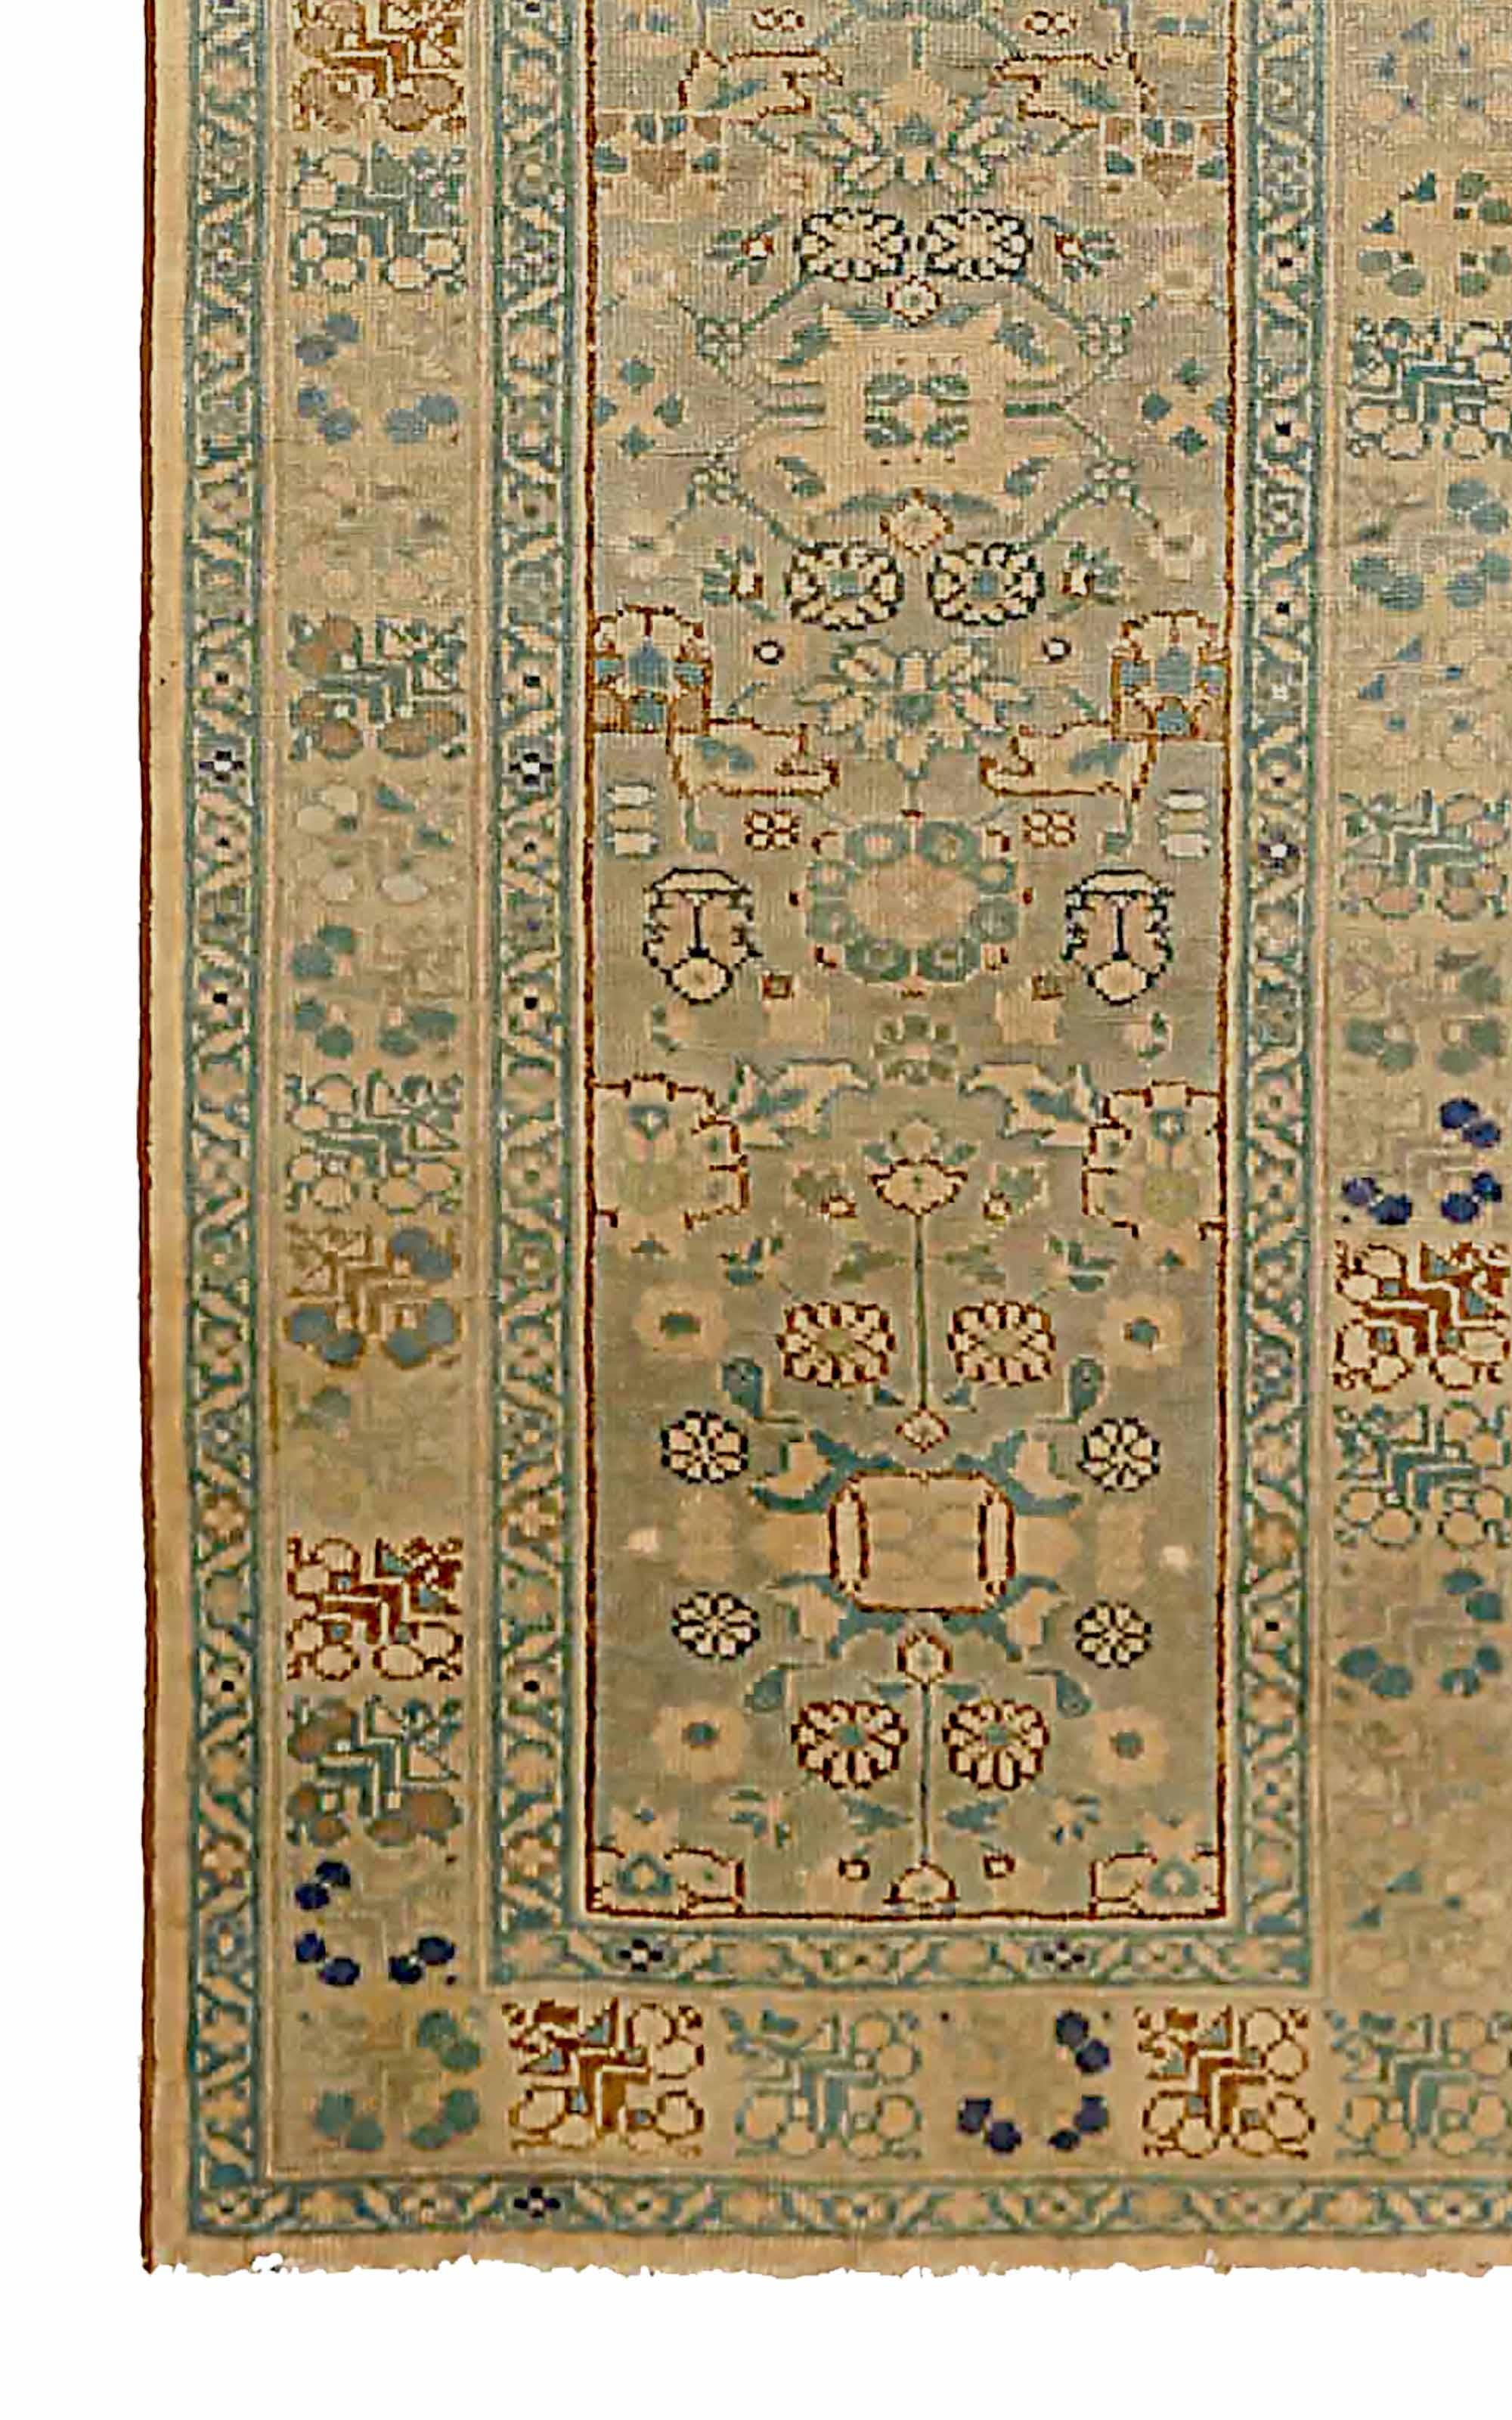 Hand-Woven Antique Persian Runner Rug Sultanabad Design For Sale